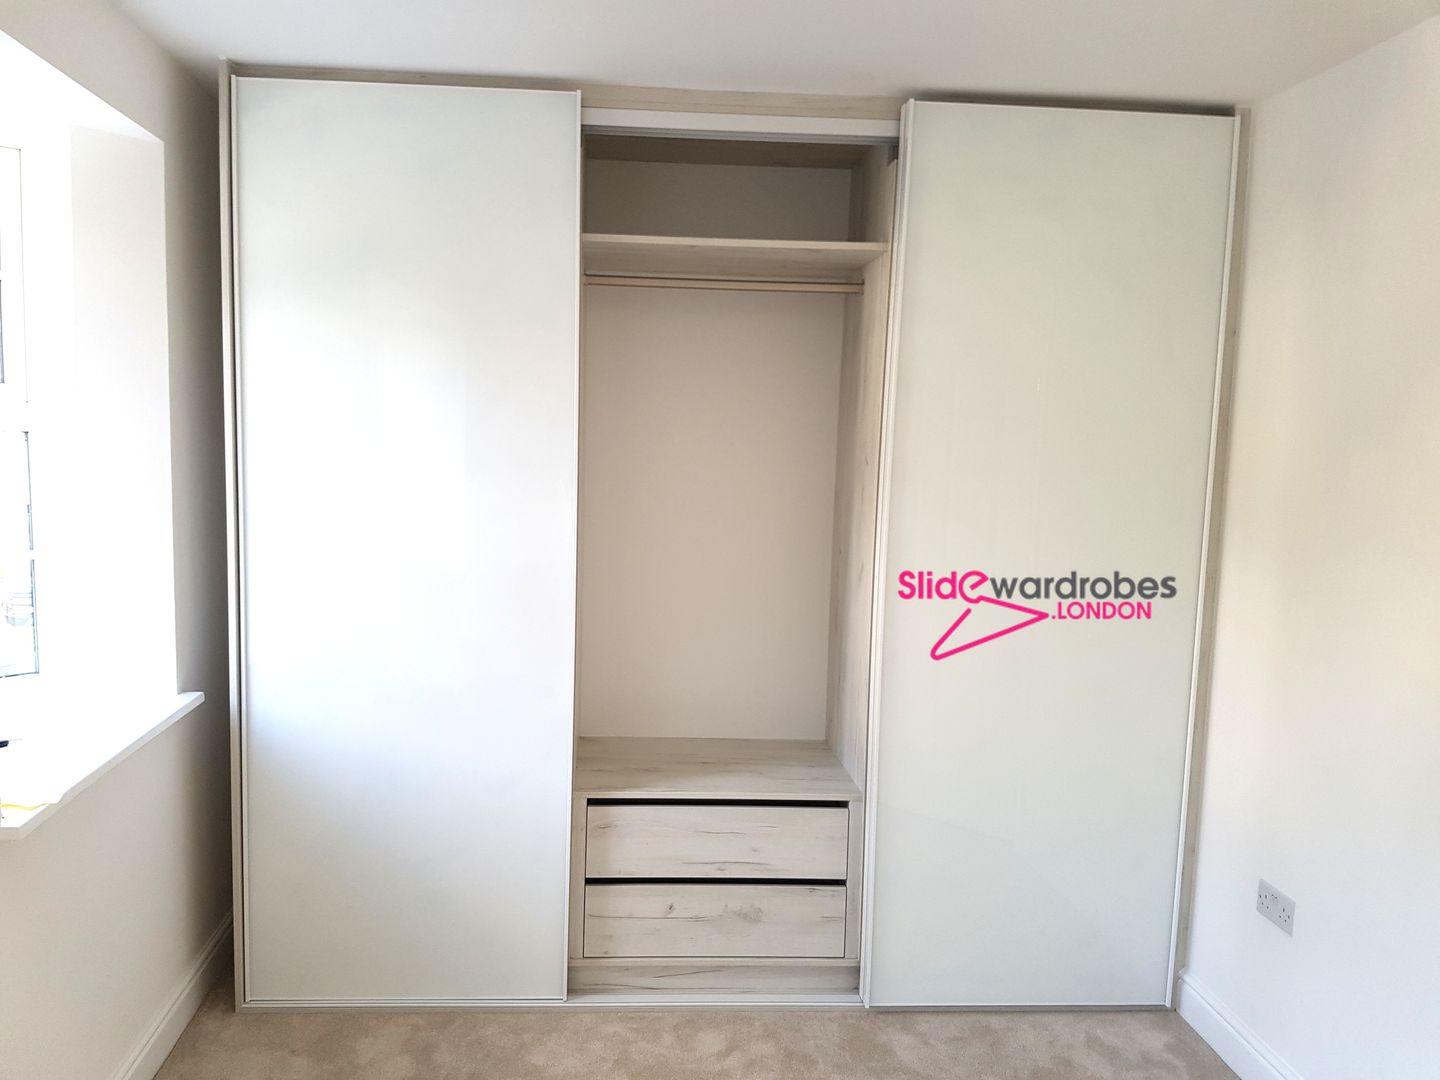 Custom made wardrobe with 3 sliding doors. Opened door view Slide Wardrobes London Chambre moderne Verre Penderies et commodes